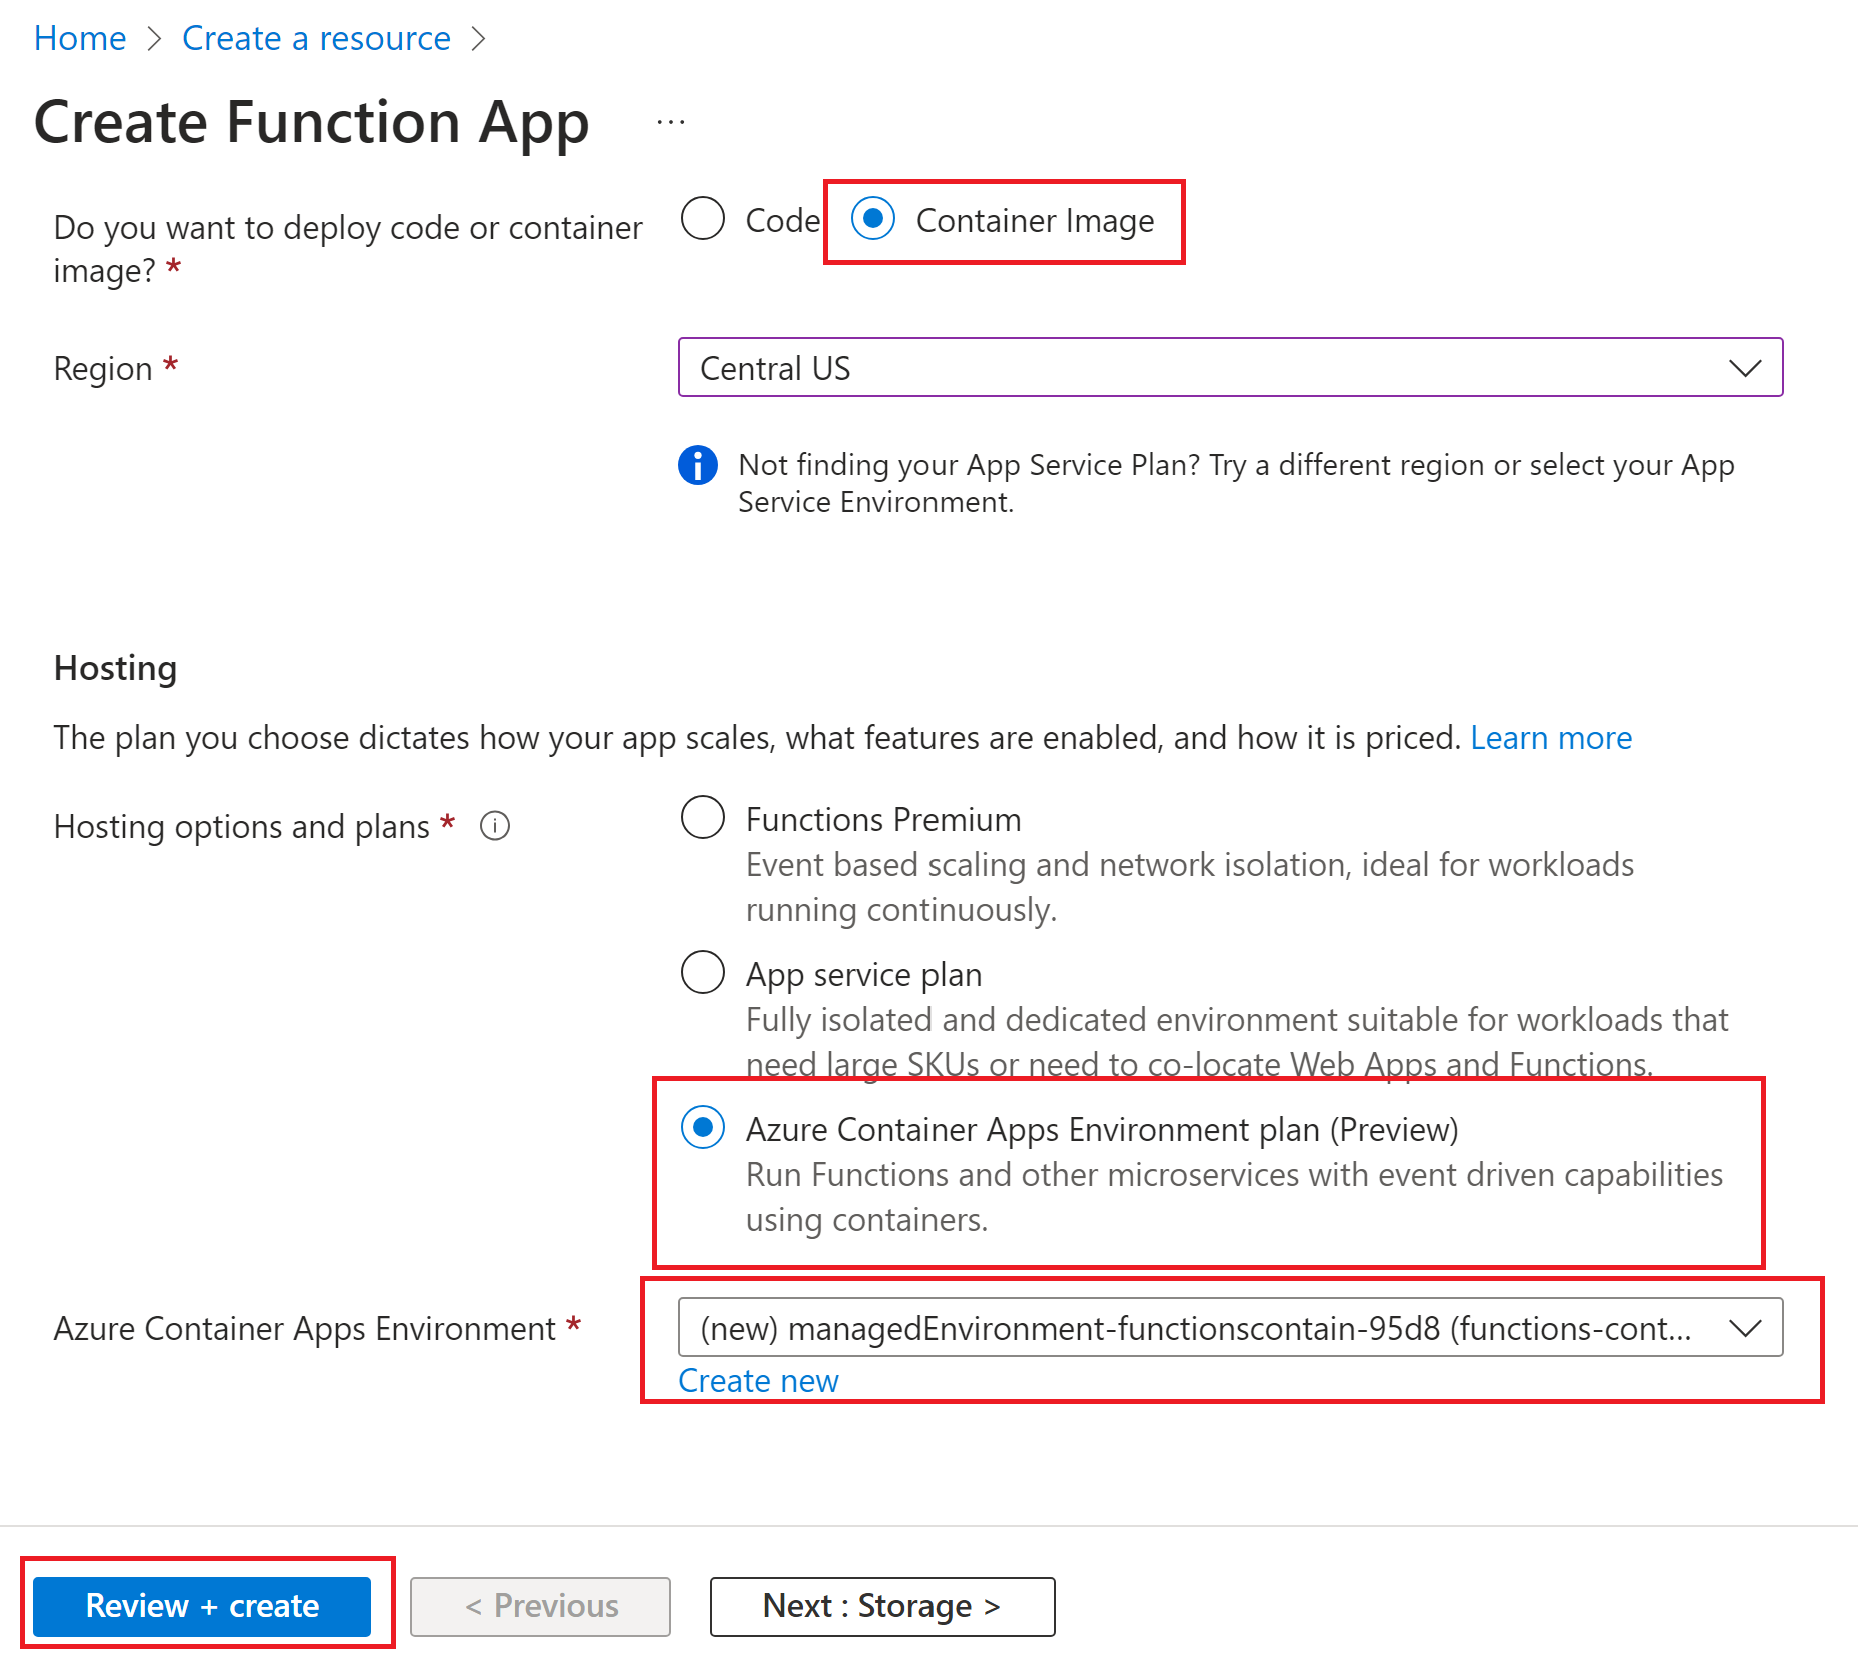 Portal create Basics tab for a containerized function app hosted in Azure Container Apps.